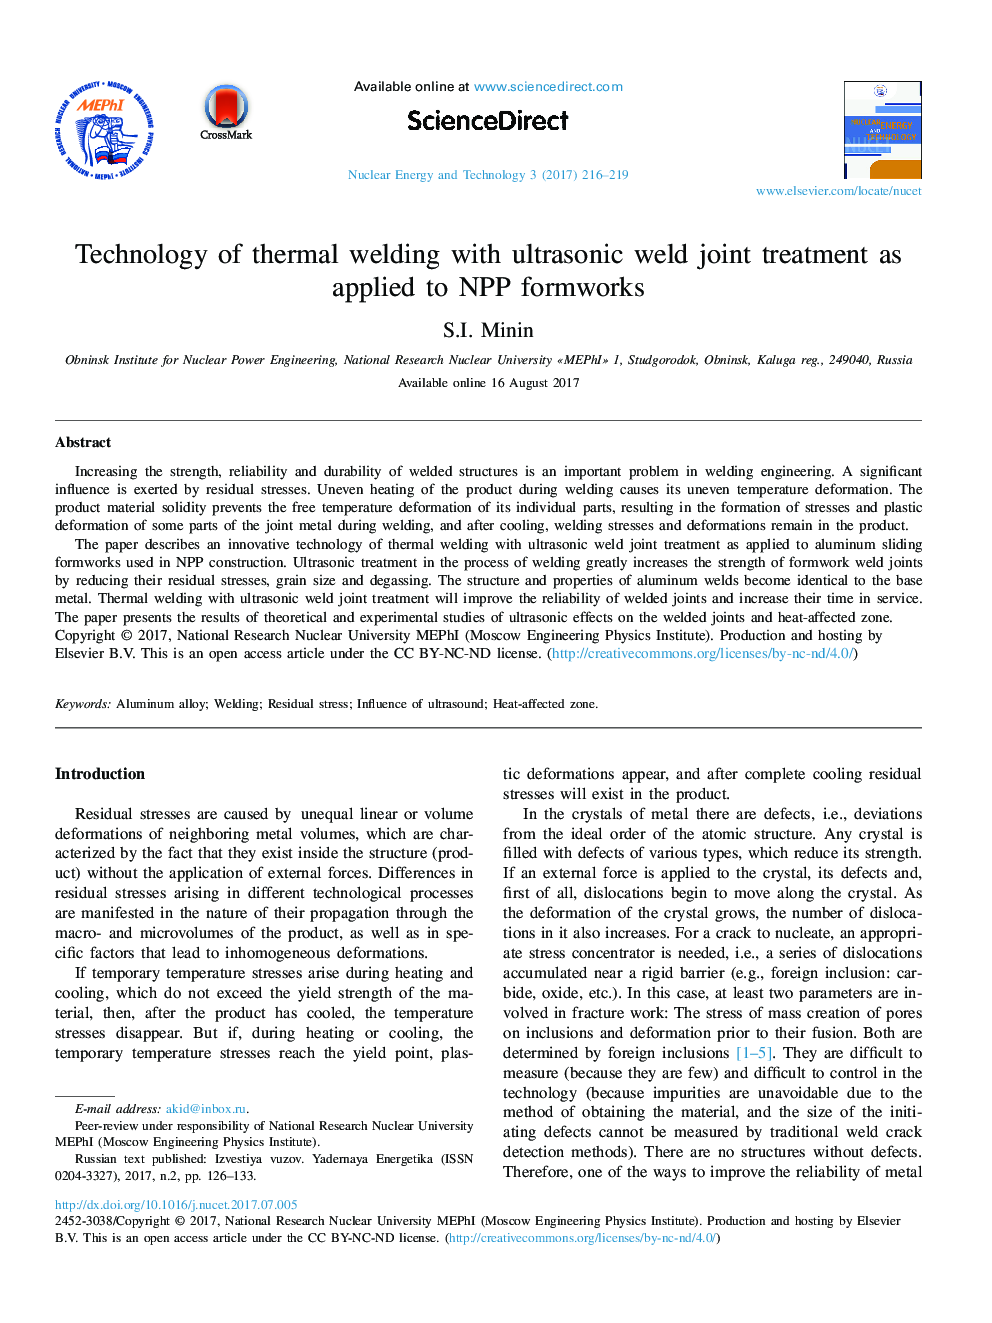 Technology of thermal welding with ultrasonic weld joint treatment as applied to NPP formworks